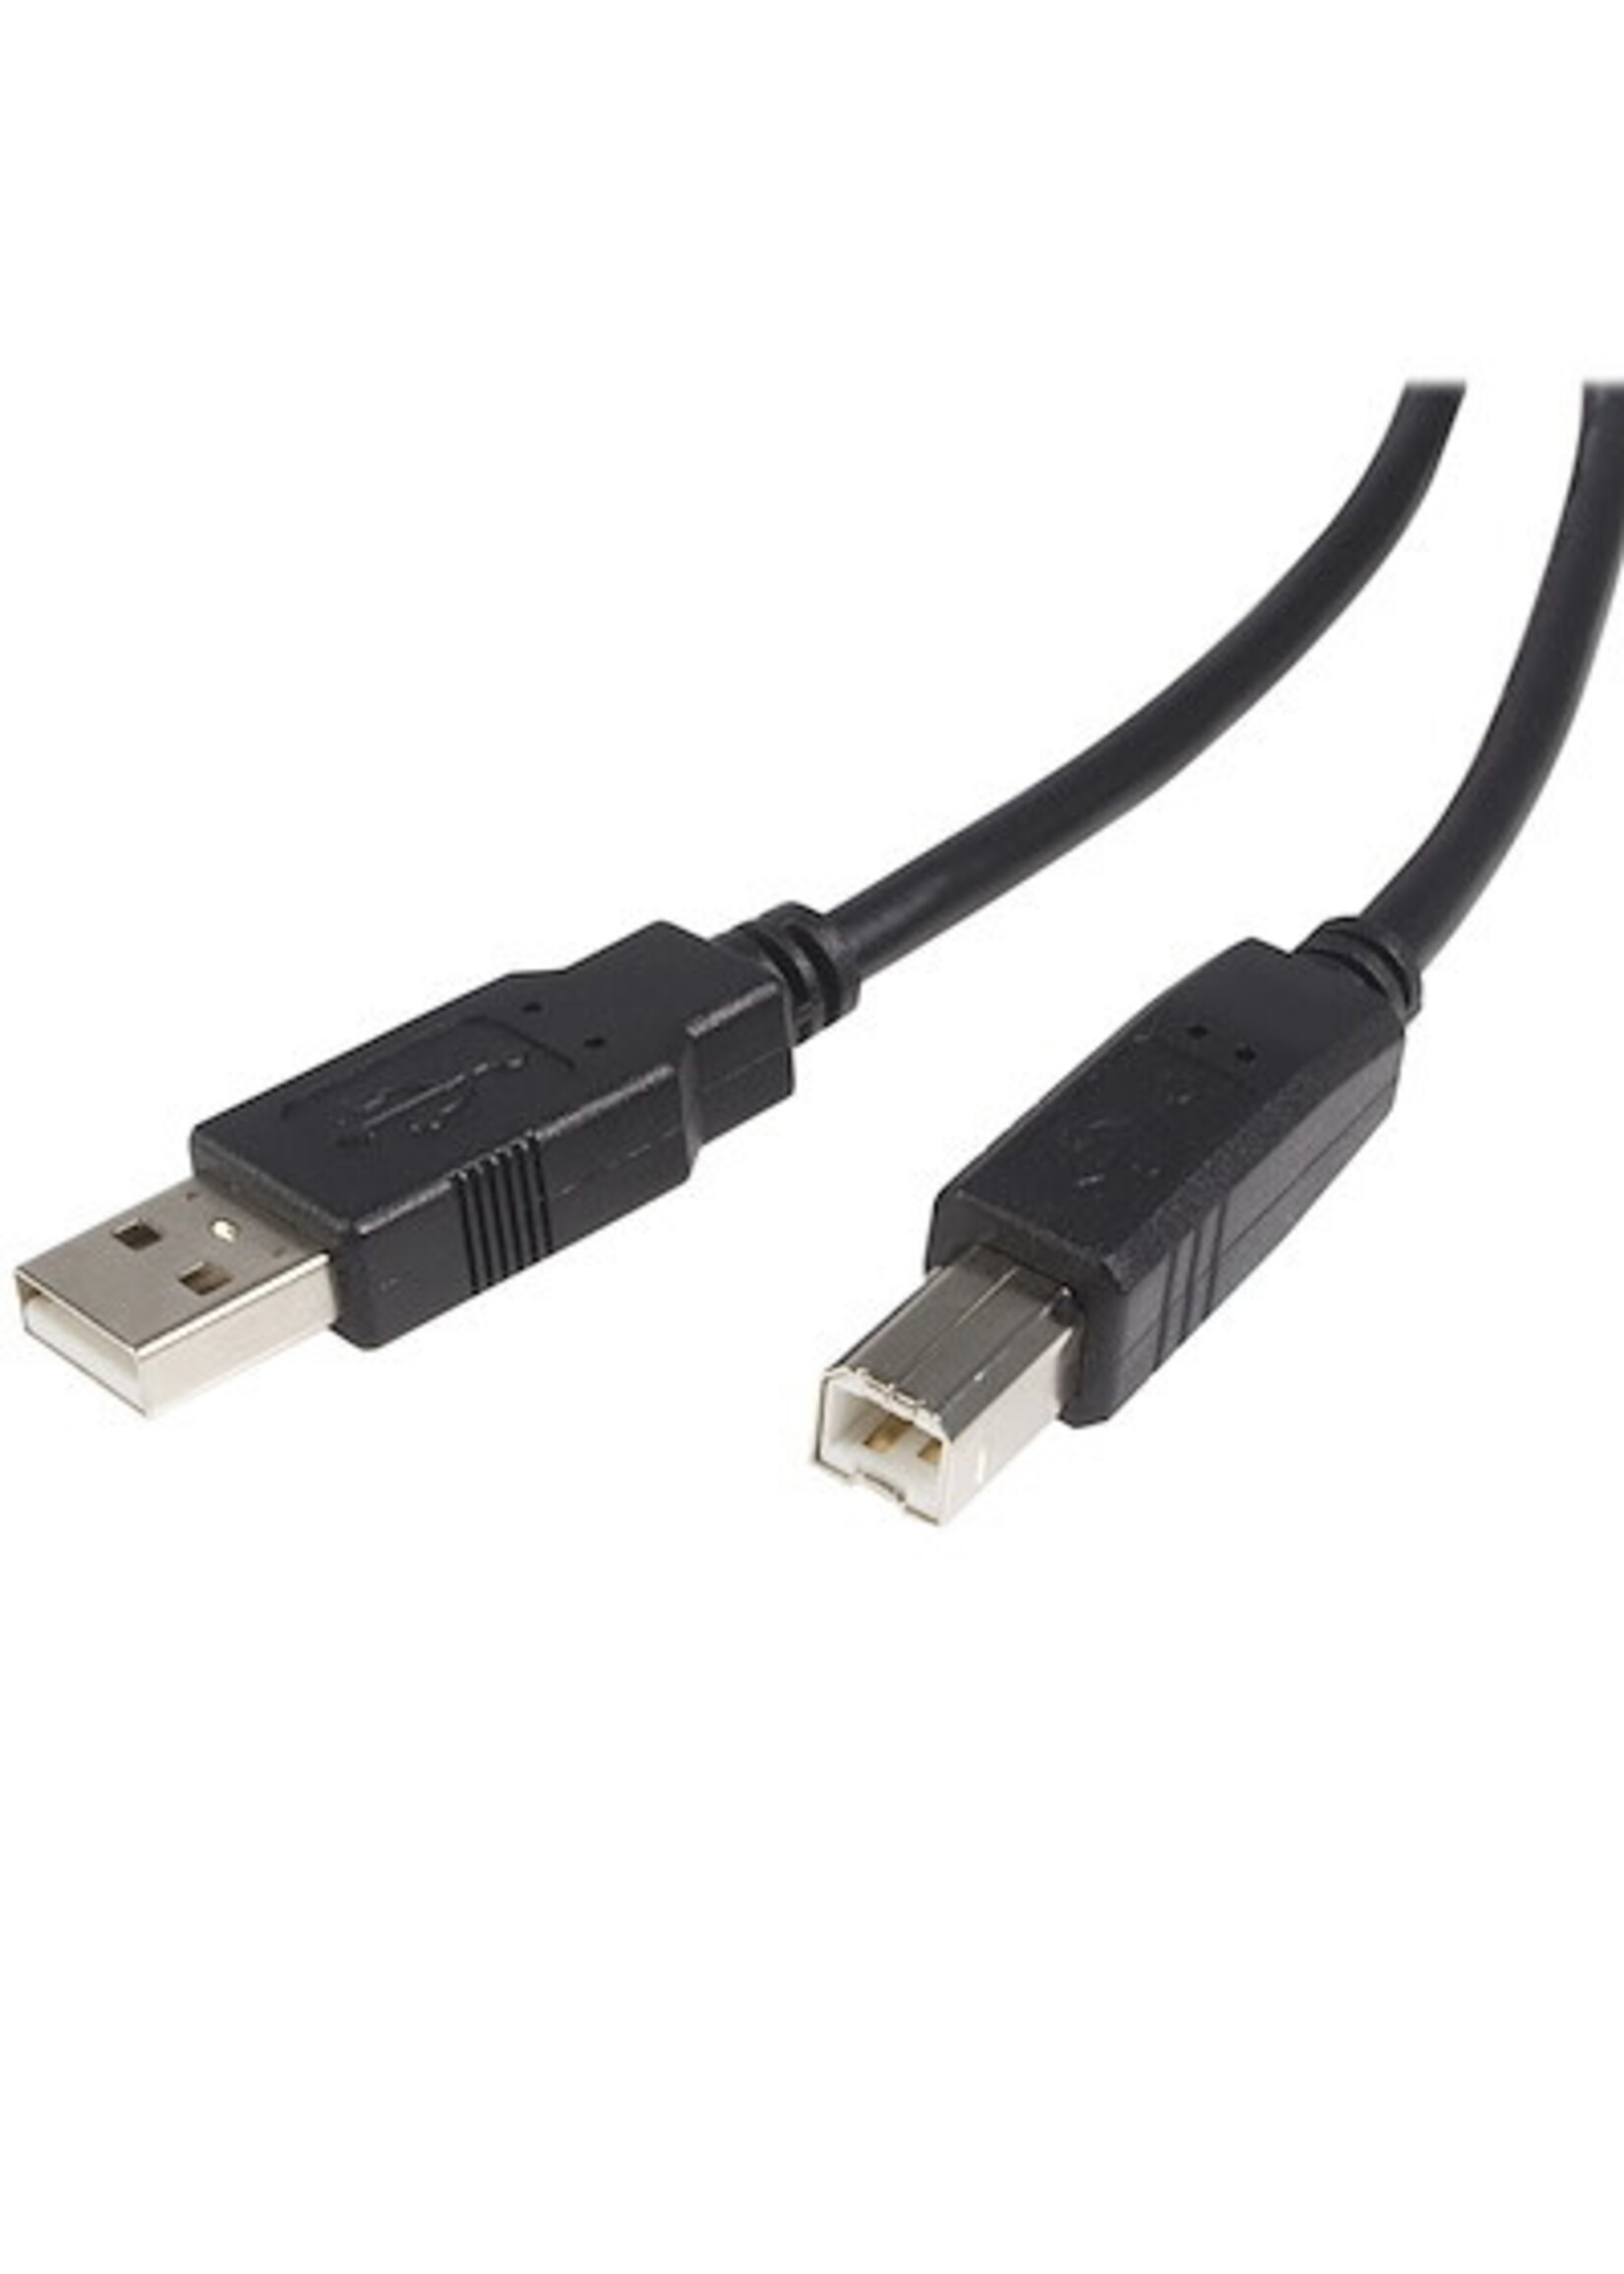 Startech 15' High Speed USB 2.0 Cable